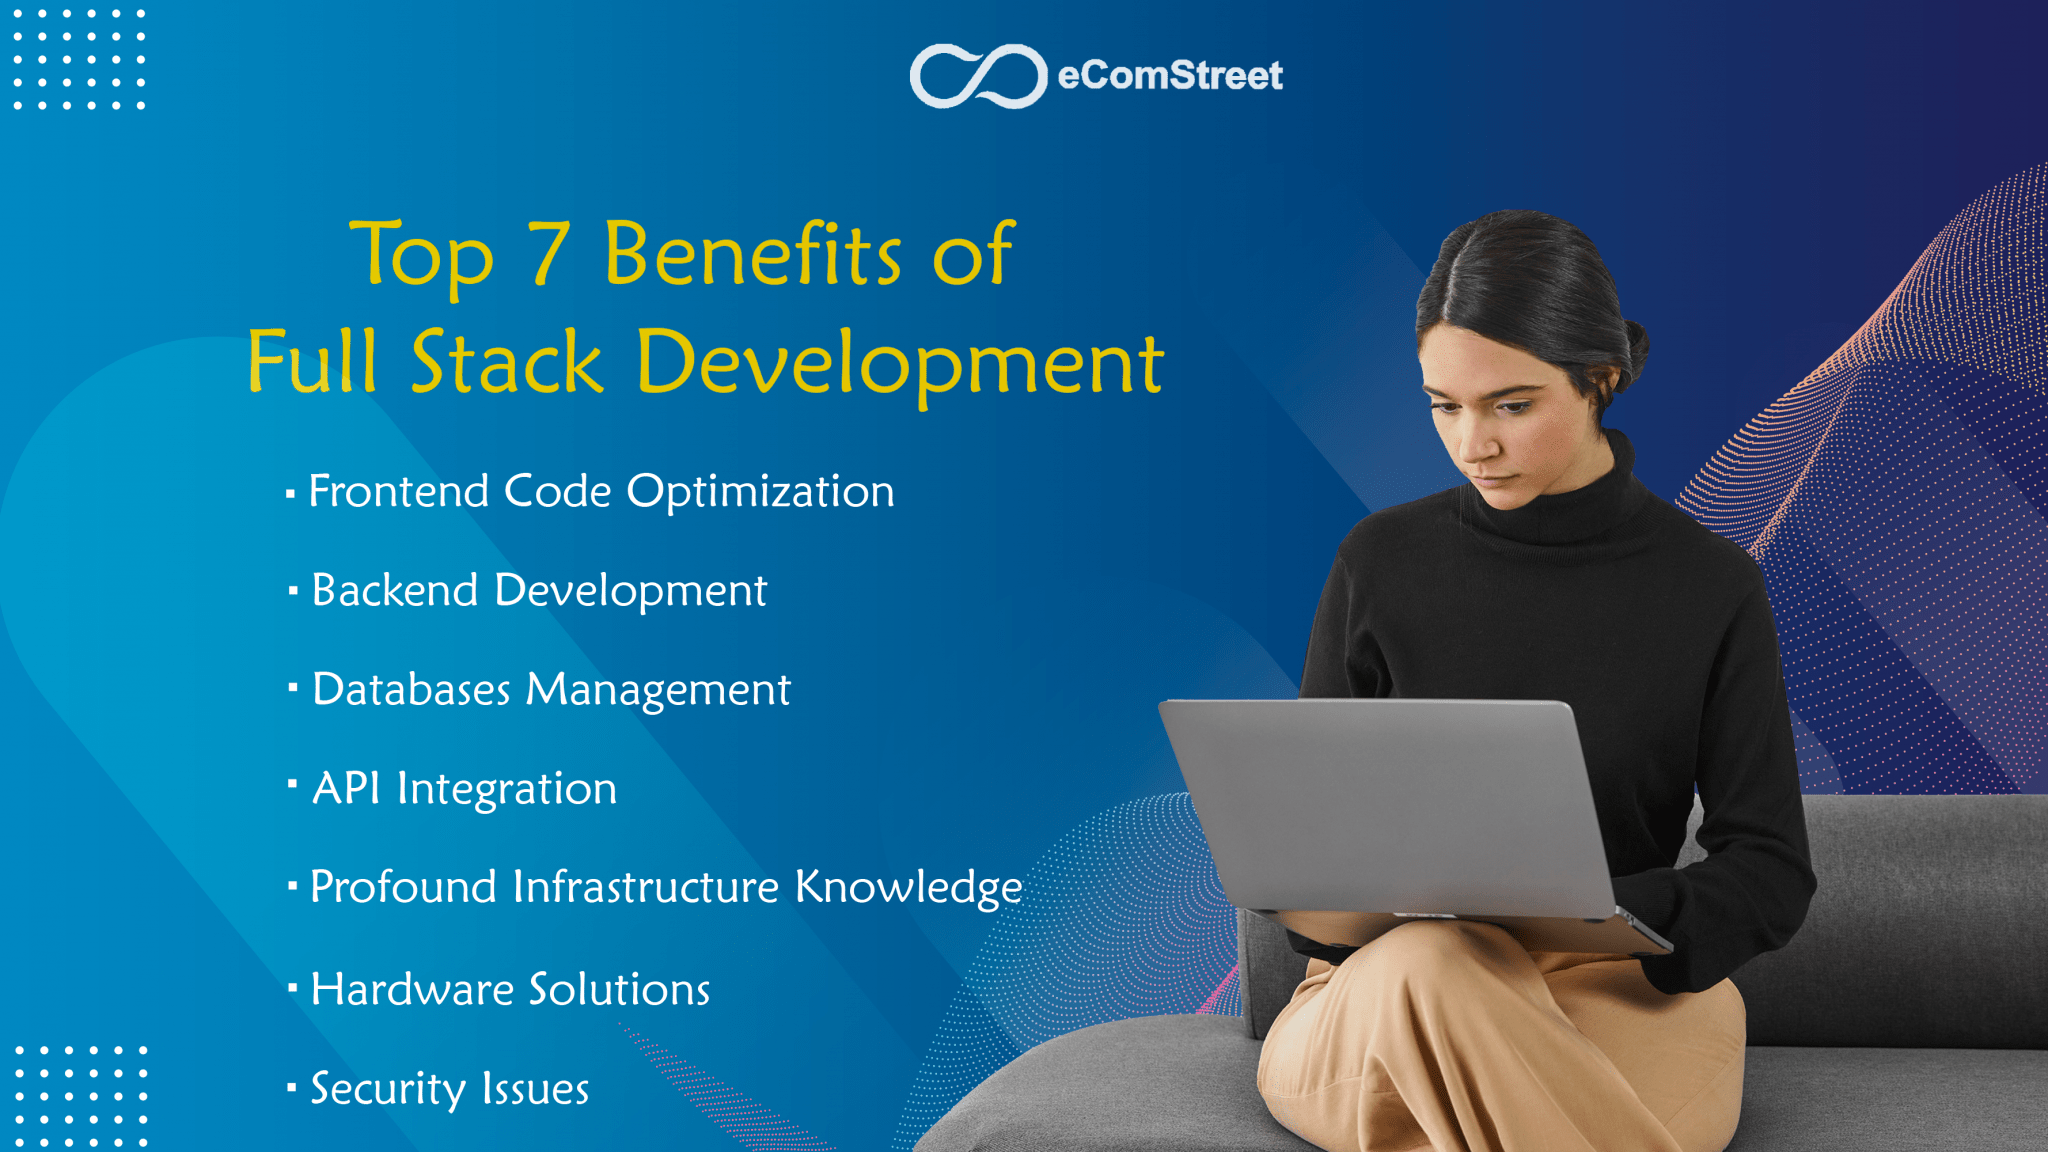 Top 7 Benefits of Being a Full Stack Developer